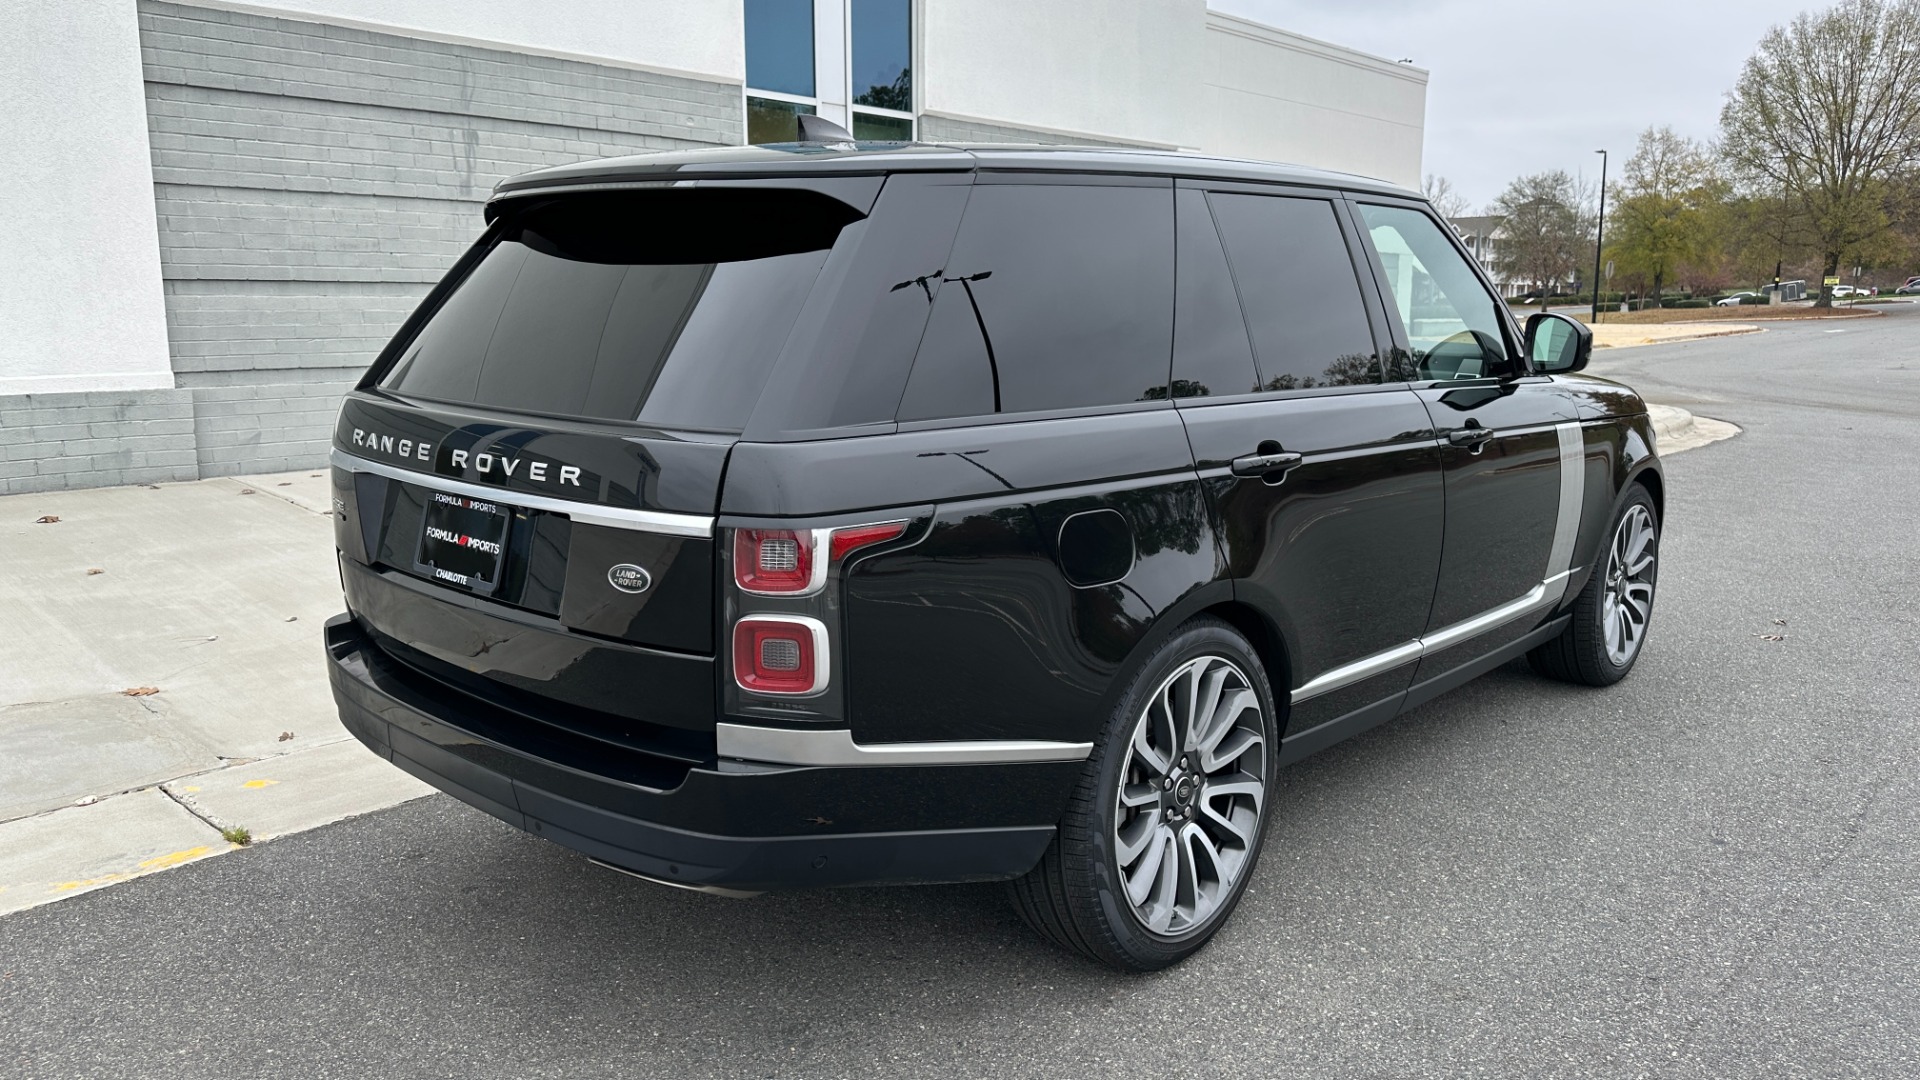 Used 2020 Land Rover Range Rover P525 HSE / DRIVE PRO PACK / 22IN WHEELS / MERIDIAN SOUND / REAR CONVENIENCE for sale $72,000 at Formula Imports in Charlotte NC 28227 7